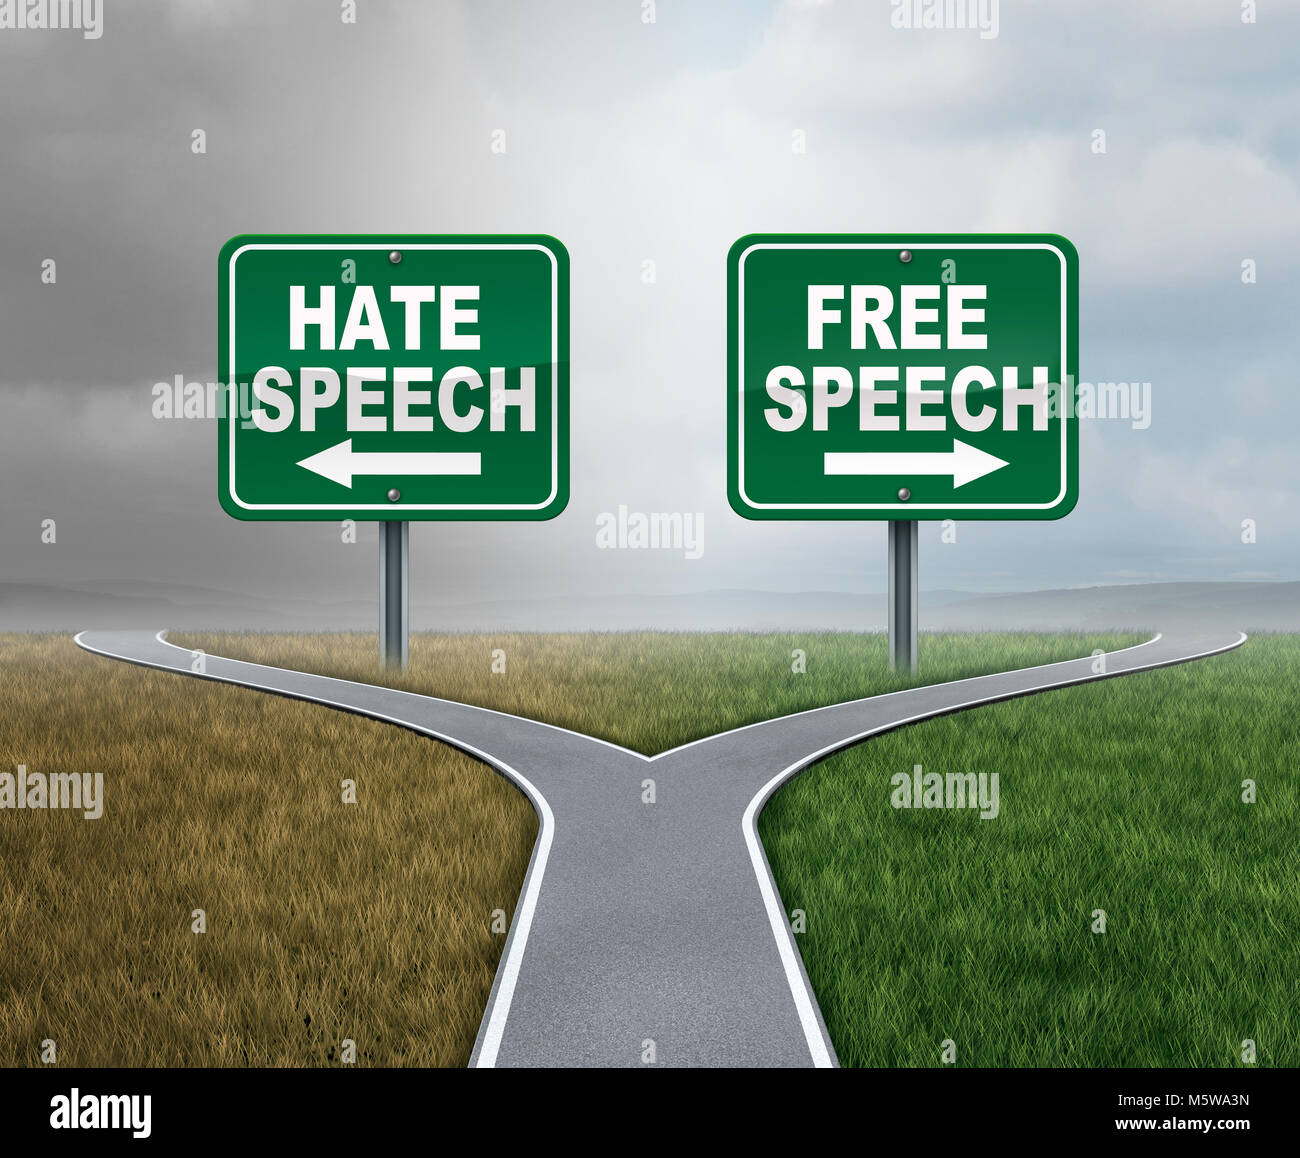 Free speech and hate talk as freedom or hatred symbol as opposite political directions with 3D illustration elements. Stock Photo